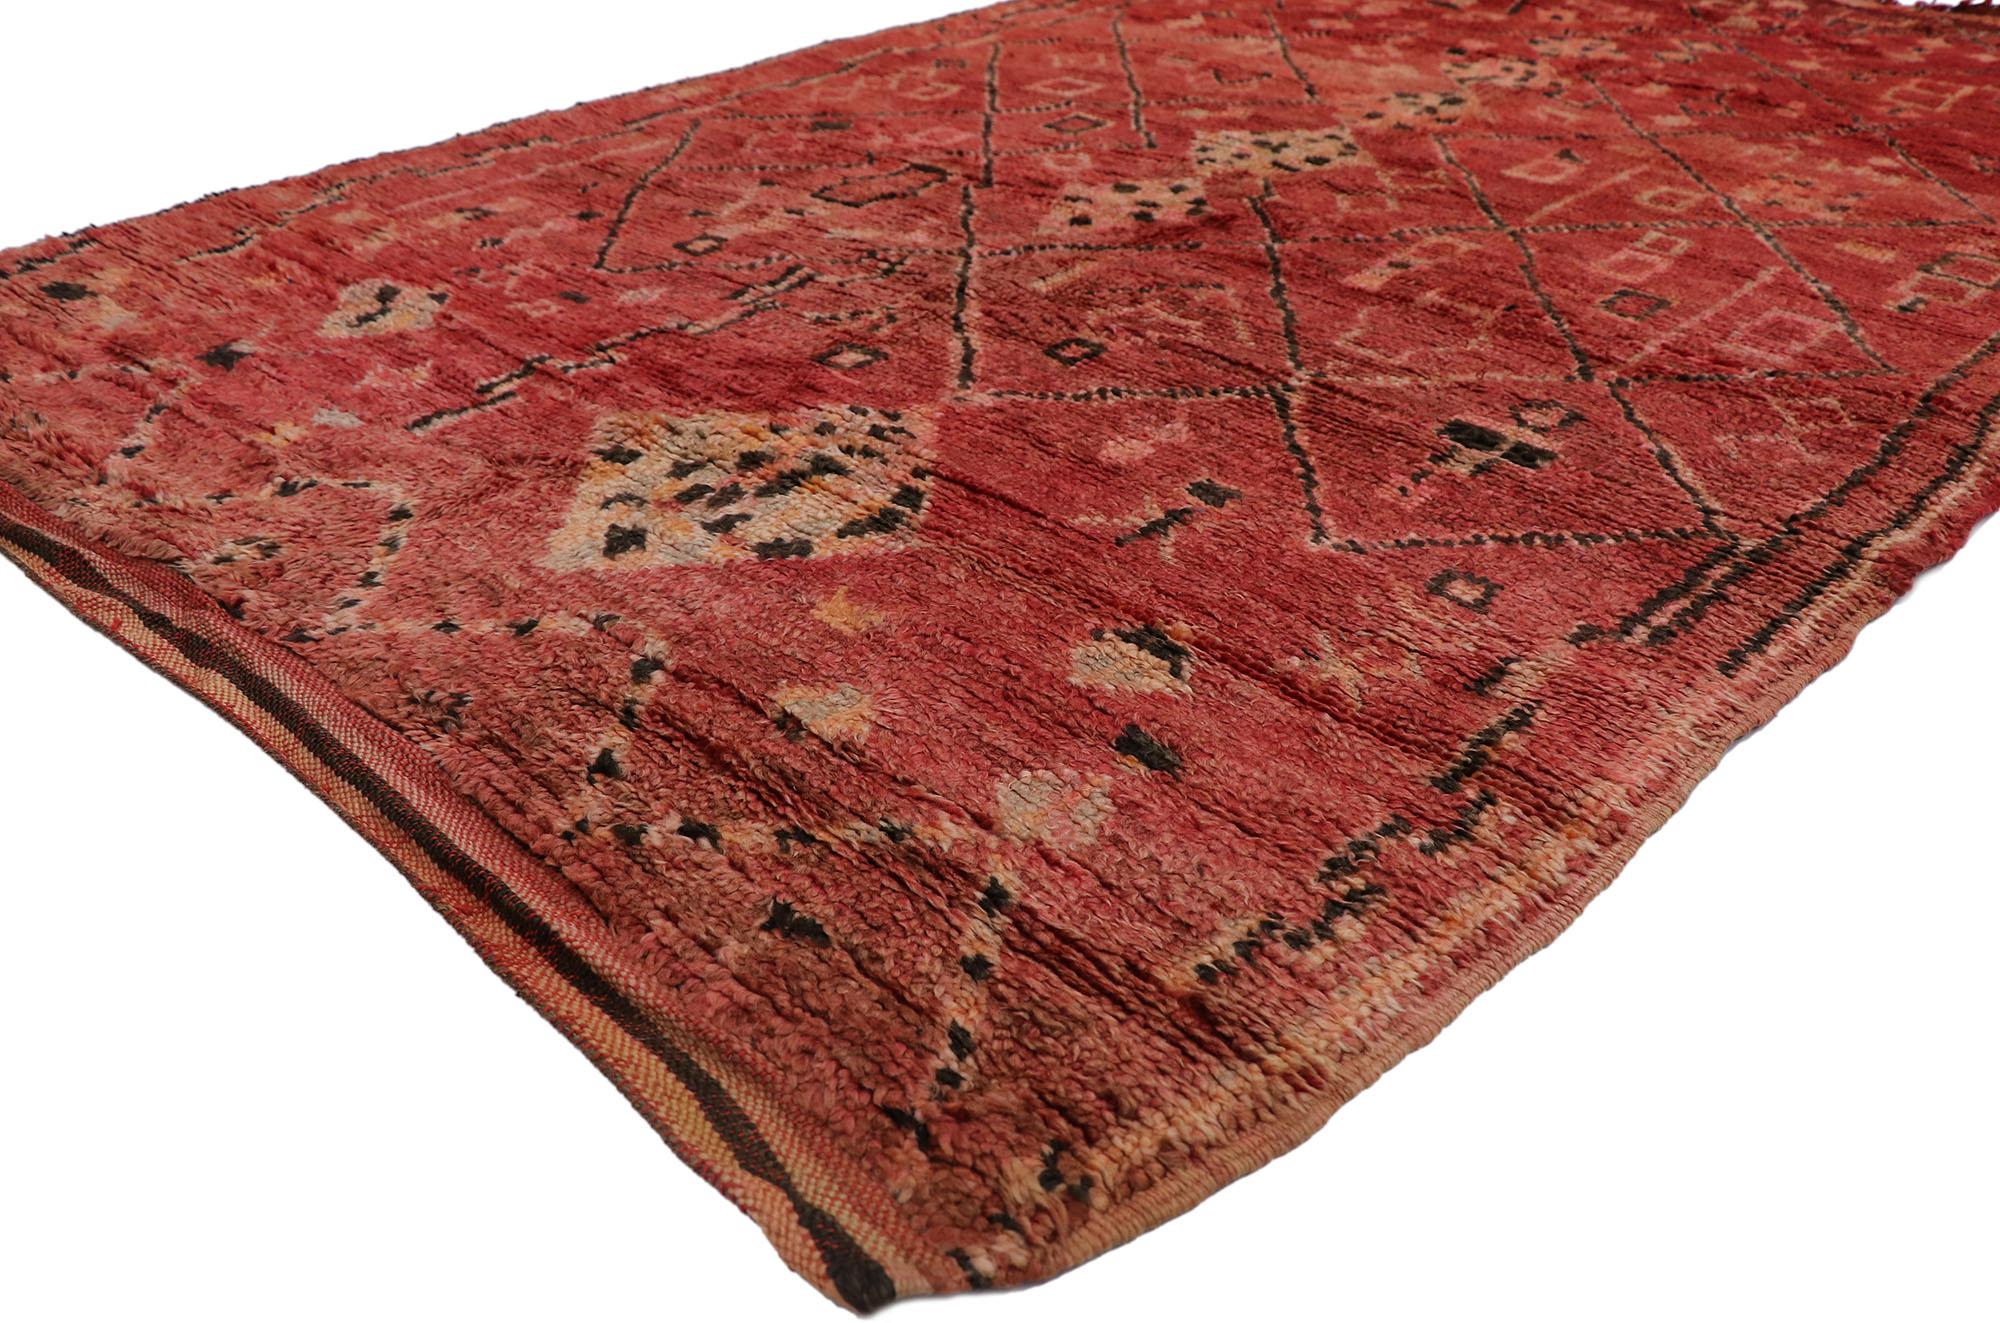 21315 Vintage Red Boujad Moroccan Rug, 05'05 x 08'05. Boujad rugs, born from Morocco's Boujad region, are exquisite handwoven treasures reflecting the vibrant artistry passed down by Berber tribes, particularly the Haouz and Rehamna. Bursting with a